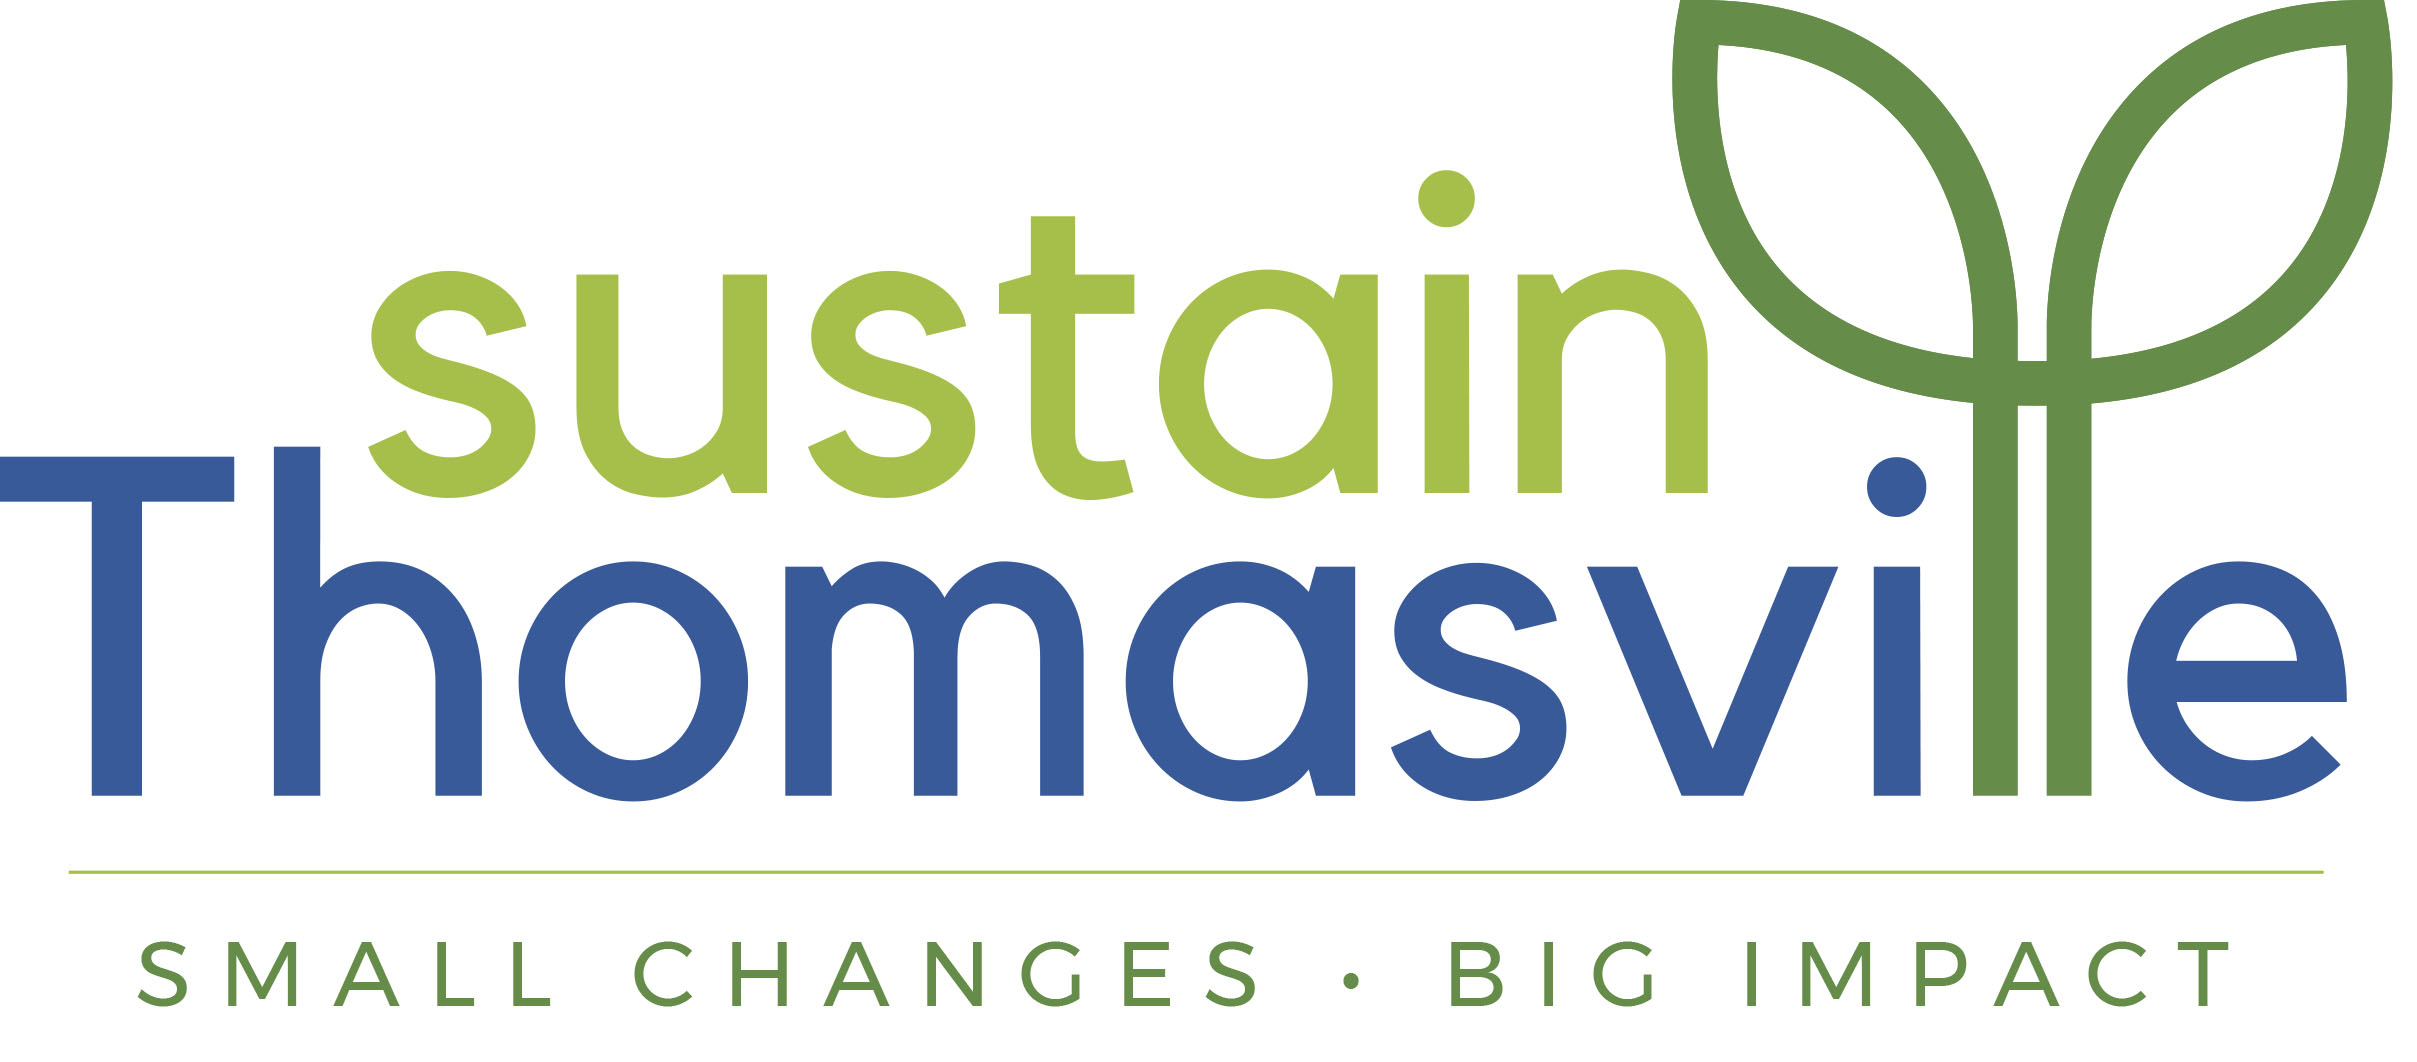 Photo for CITY OF THOMASVILLE LAUNCHES SUSTAINABILITY CAMPAIGN